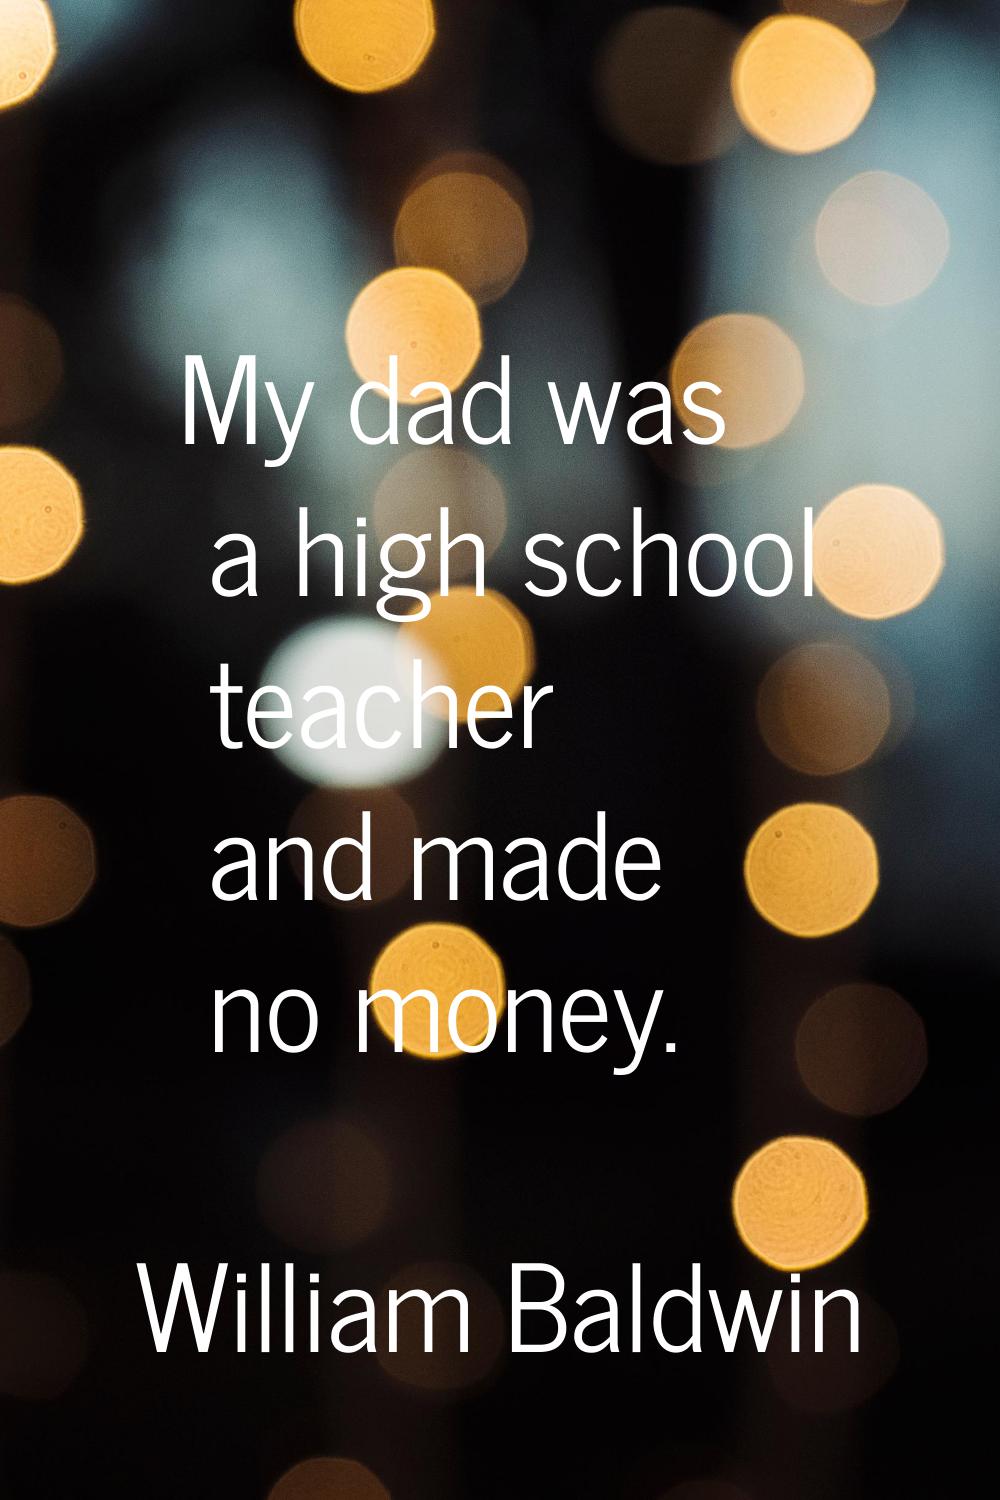 My dad was a high school teacher and made no money.